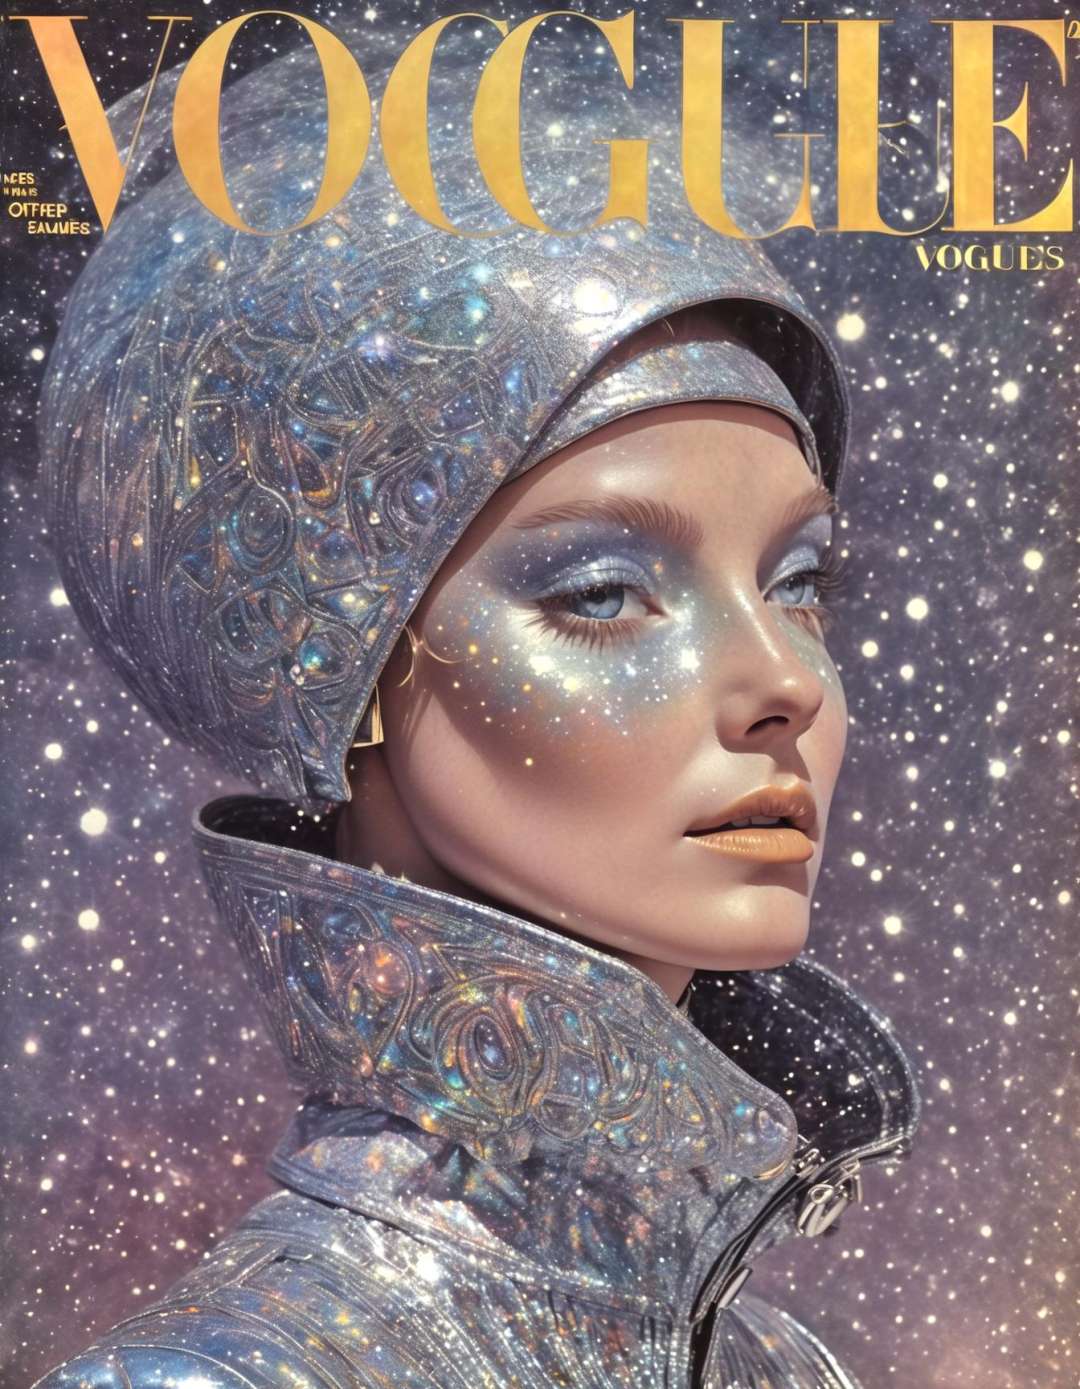 She holographic leather, intergalactic fashion, cosmic vibes, space explorer attire, otherworldly chic, interstellar glamour, Space & Time Fashion Journal, cosmic nebulae.,highly intricate,(VOGUE Cover Magazine:1.15),1968, 60s, black letters, hyper detailed, photorealistic,,